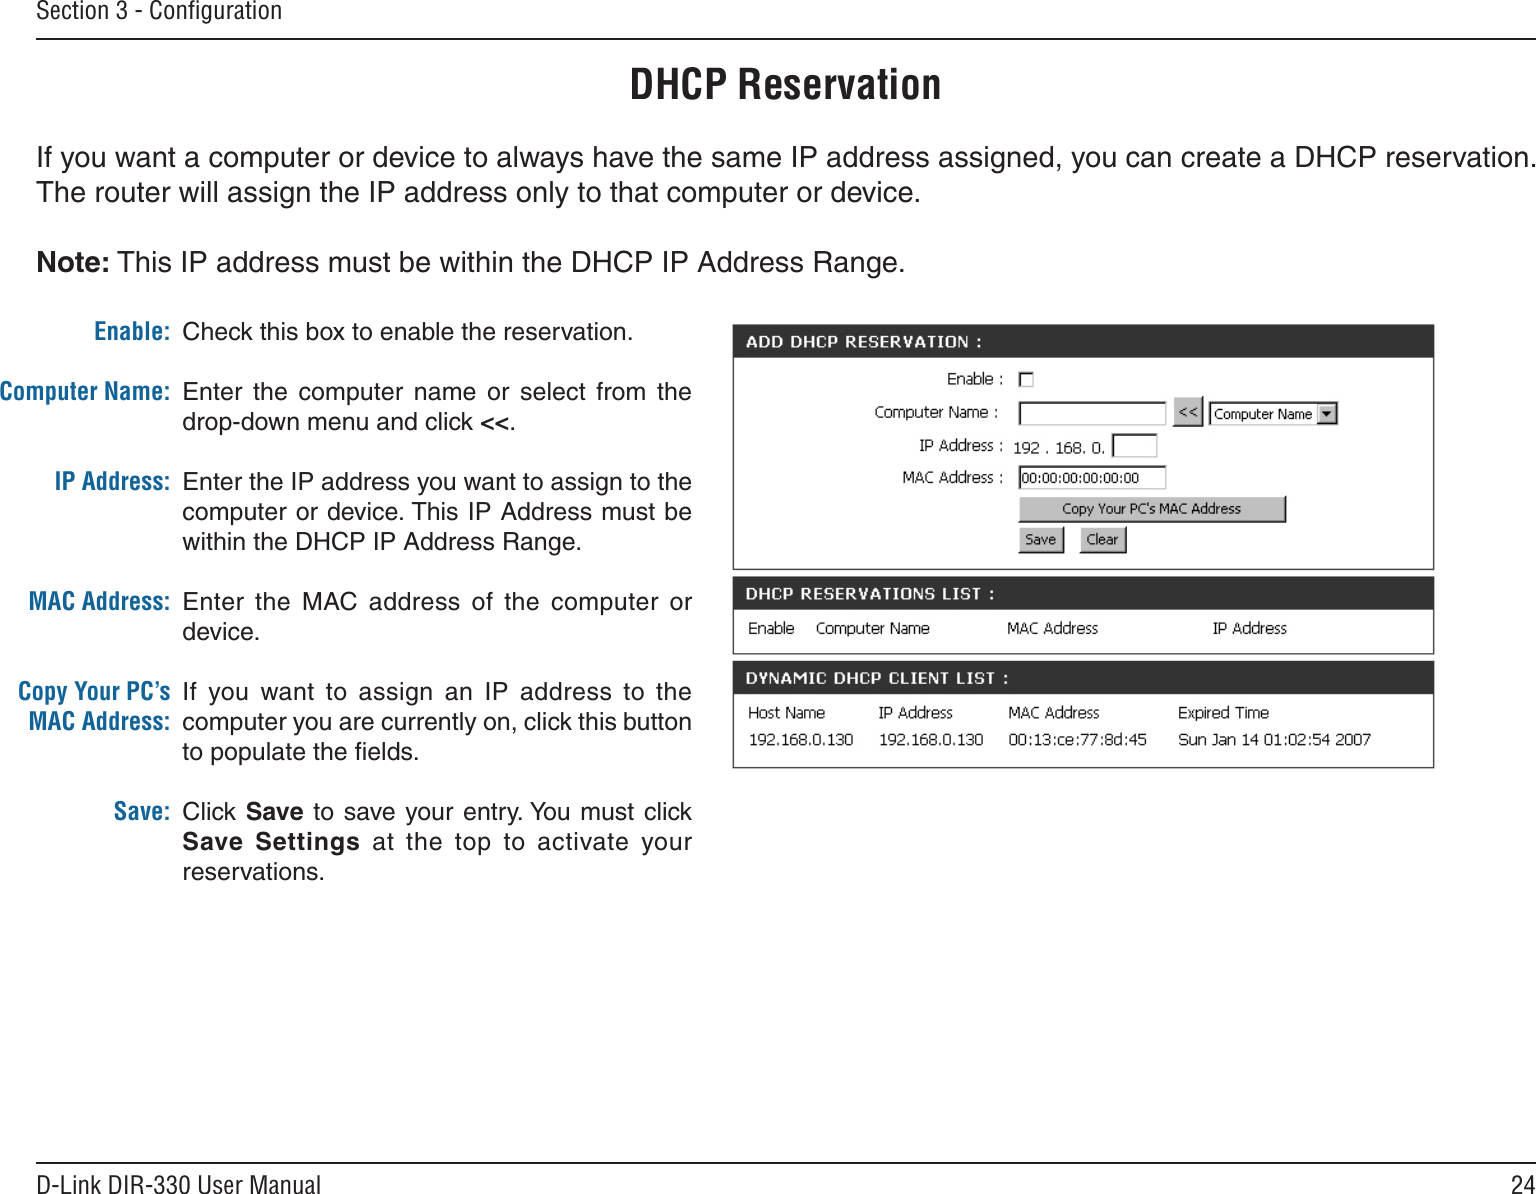 24D-Link DIR-330 User ManualSection 3 - ConﬁgurationDHCP ReservationIf you want a computer or device to always have the same IP address assigned, you can create a DHCP reservation. The router will assign the IP address only to that computer or device. Note: This IP address must be within the DHCP IP Address Range.Check this box to enable the reservation.Enter  the  computer  name  or  select  from  the drop-down menu and click &lt;&lt;.Enter the IP address you want to assign to the computer or device. This IP Address must be within the DHCP IP Address Range.Enter  the  MAC address  of  the  computer  or device.If  you  want  to  assign  an  IP  address  to  the computer you are currently on, click this button to populate the ﬁelds. Click Save to  save your entry. You must click Save  Settings  at  the  top  to  activate  your reservations. Enable:Computer Name:IP Address:MAC Address:Copy Your PC’s MAC Address:Save: